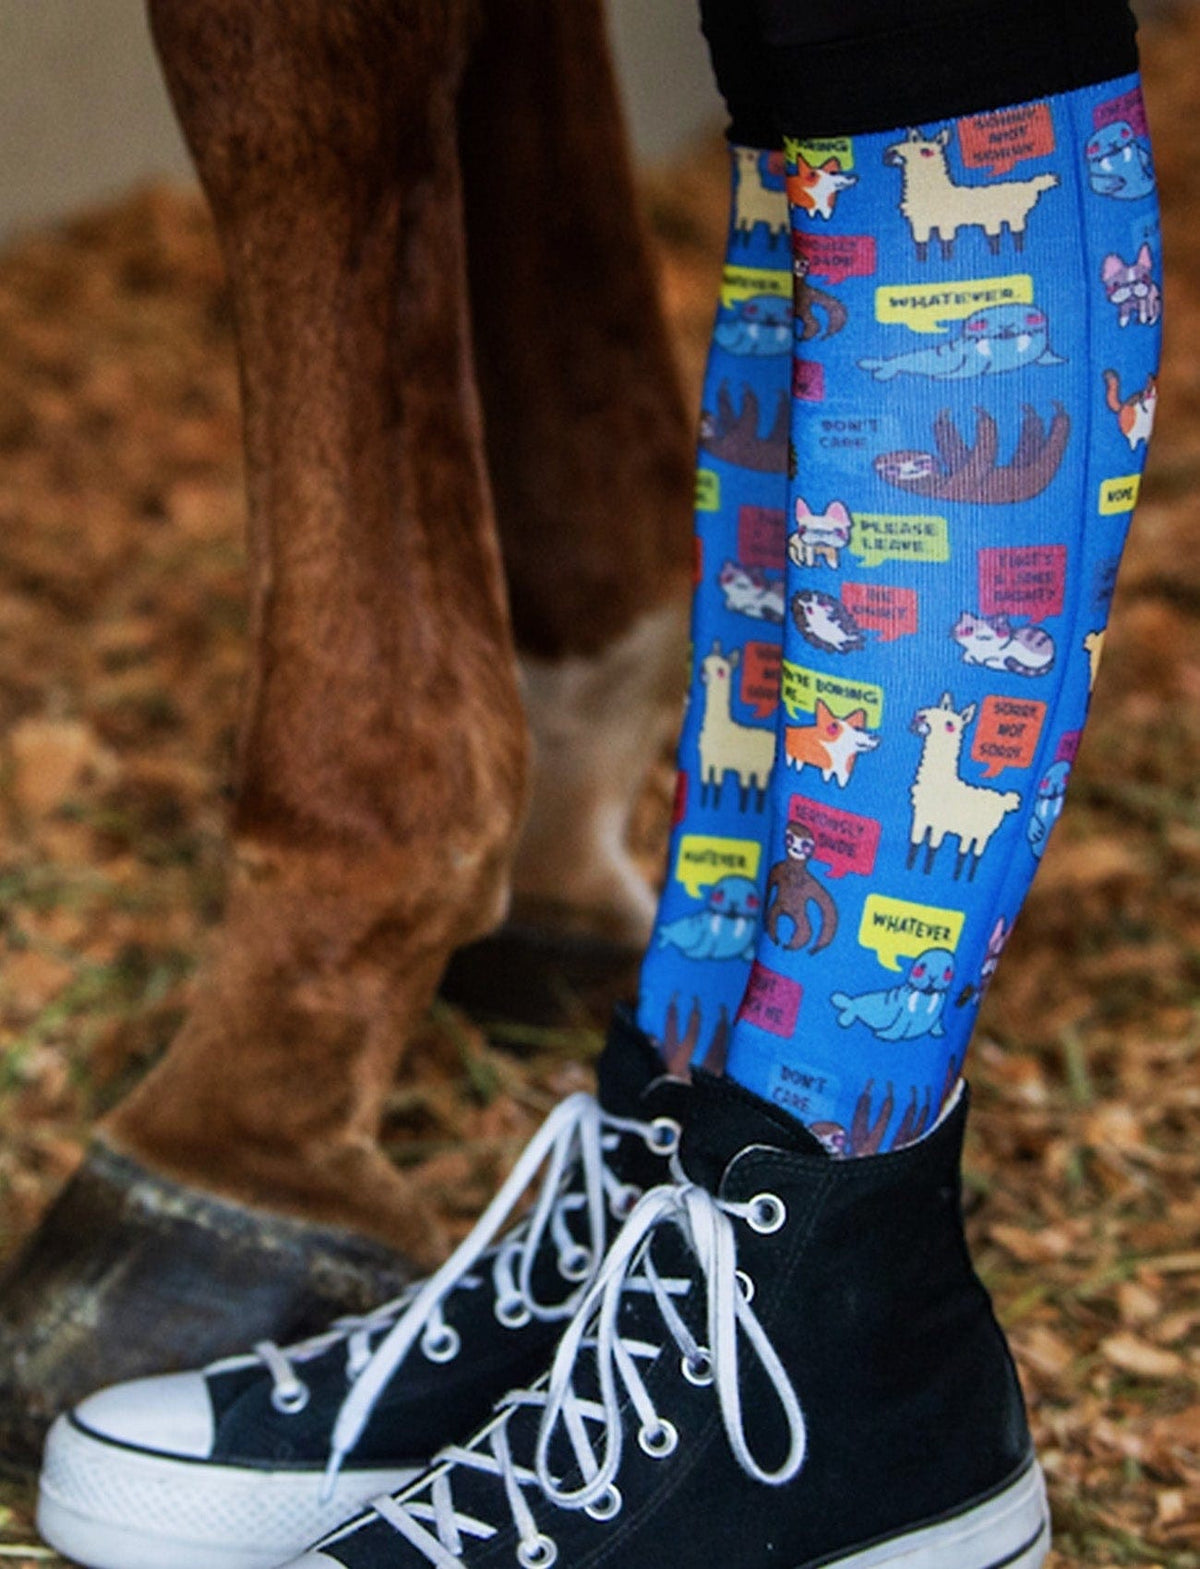 Dreamers & Schemers Socks Dreamers & Schemers- Sarcastic Animals equestrian team apparel online tack store mobile tack store custom farm apparel custom show stable clothing equestrian lifestyle horse show clothing riding clothes horses equestrian tack store